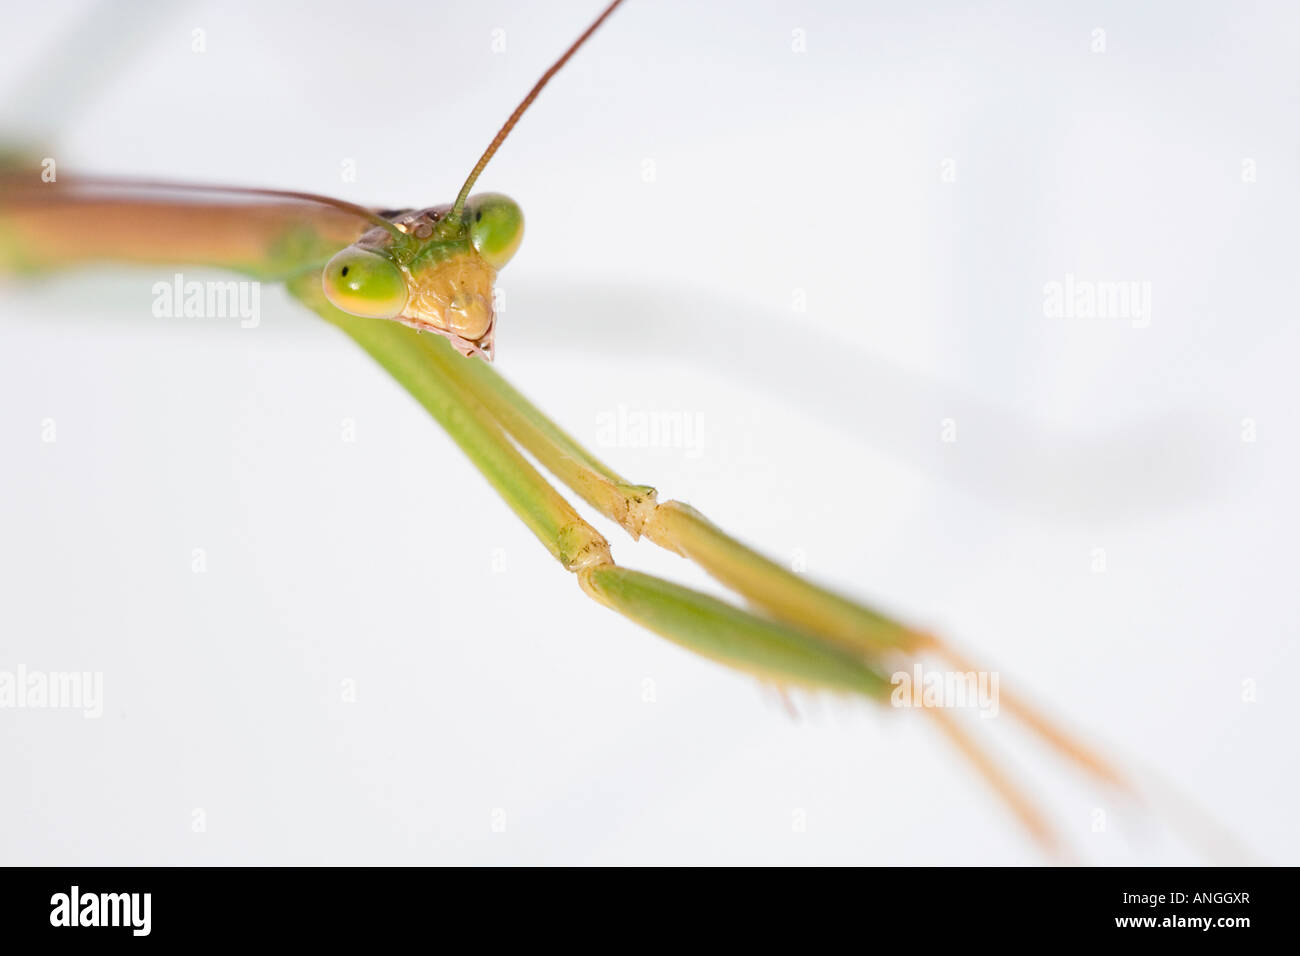 Praying mantis chef jambes close up Banque D'Images